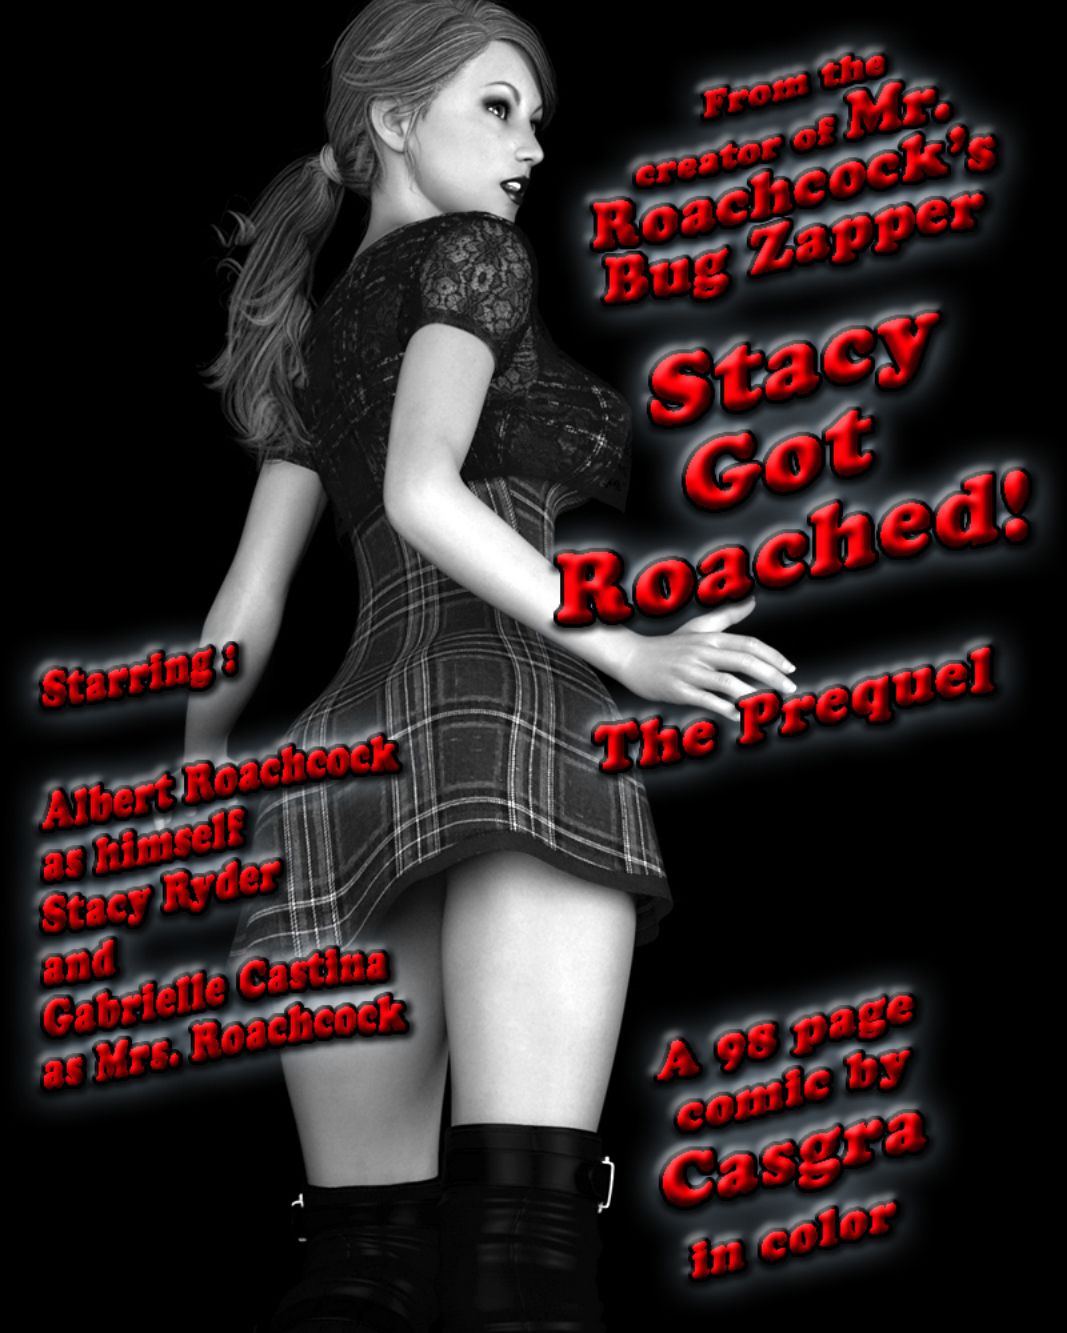 (Casgra) Stacy Got Roached! The Prequel (English) 1